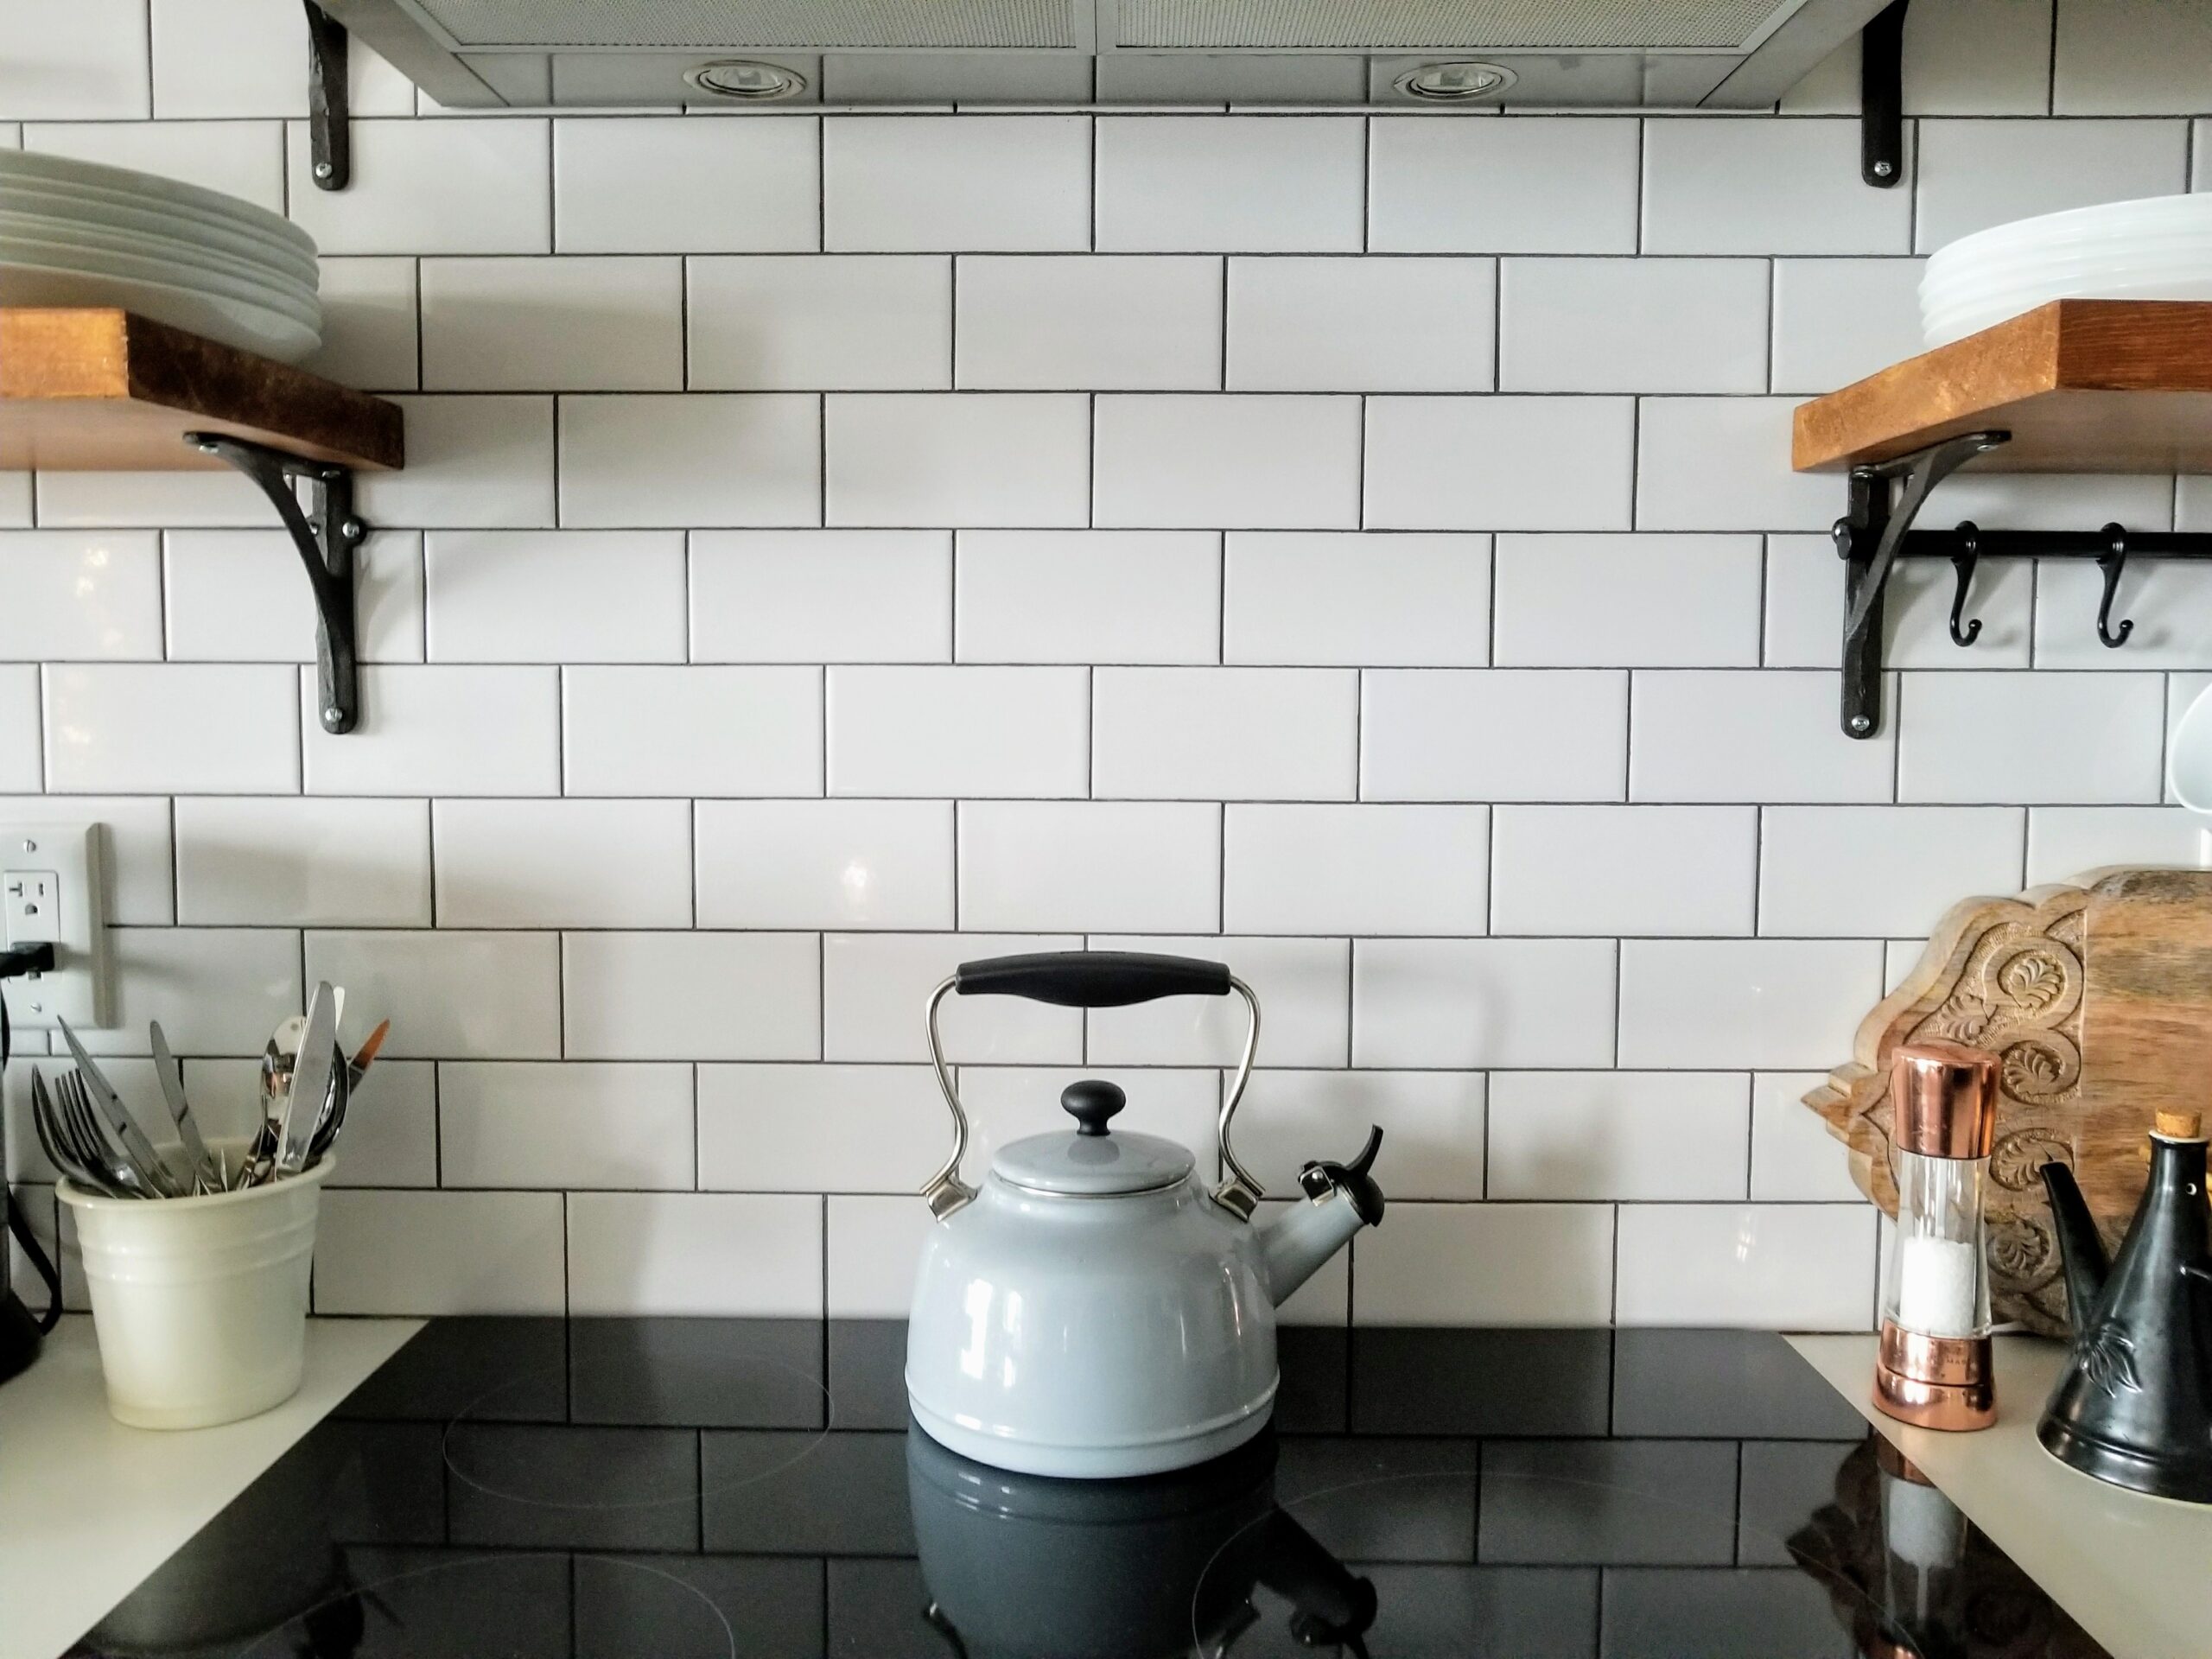 DIY Grout Stain: How to Stain the Grout Around Your Tiles